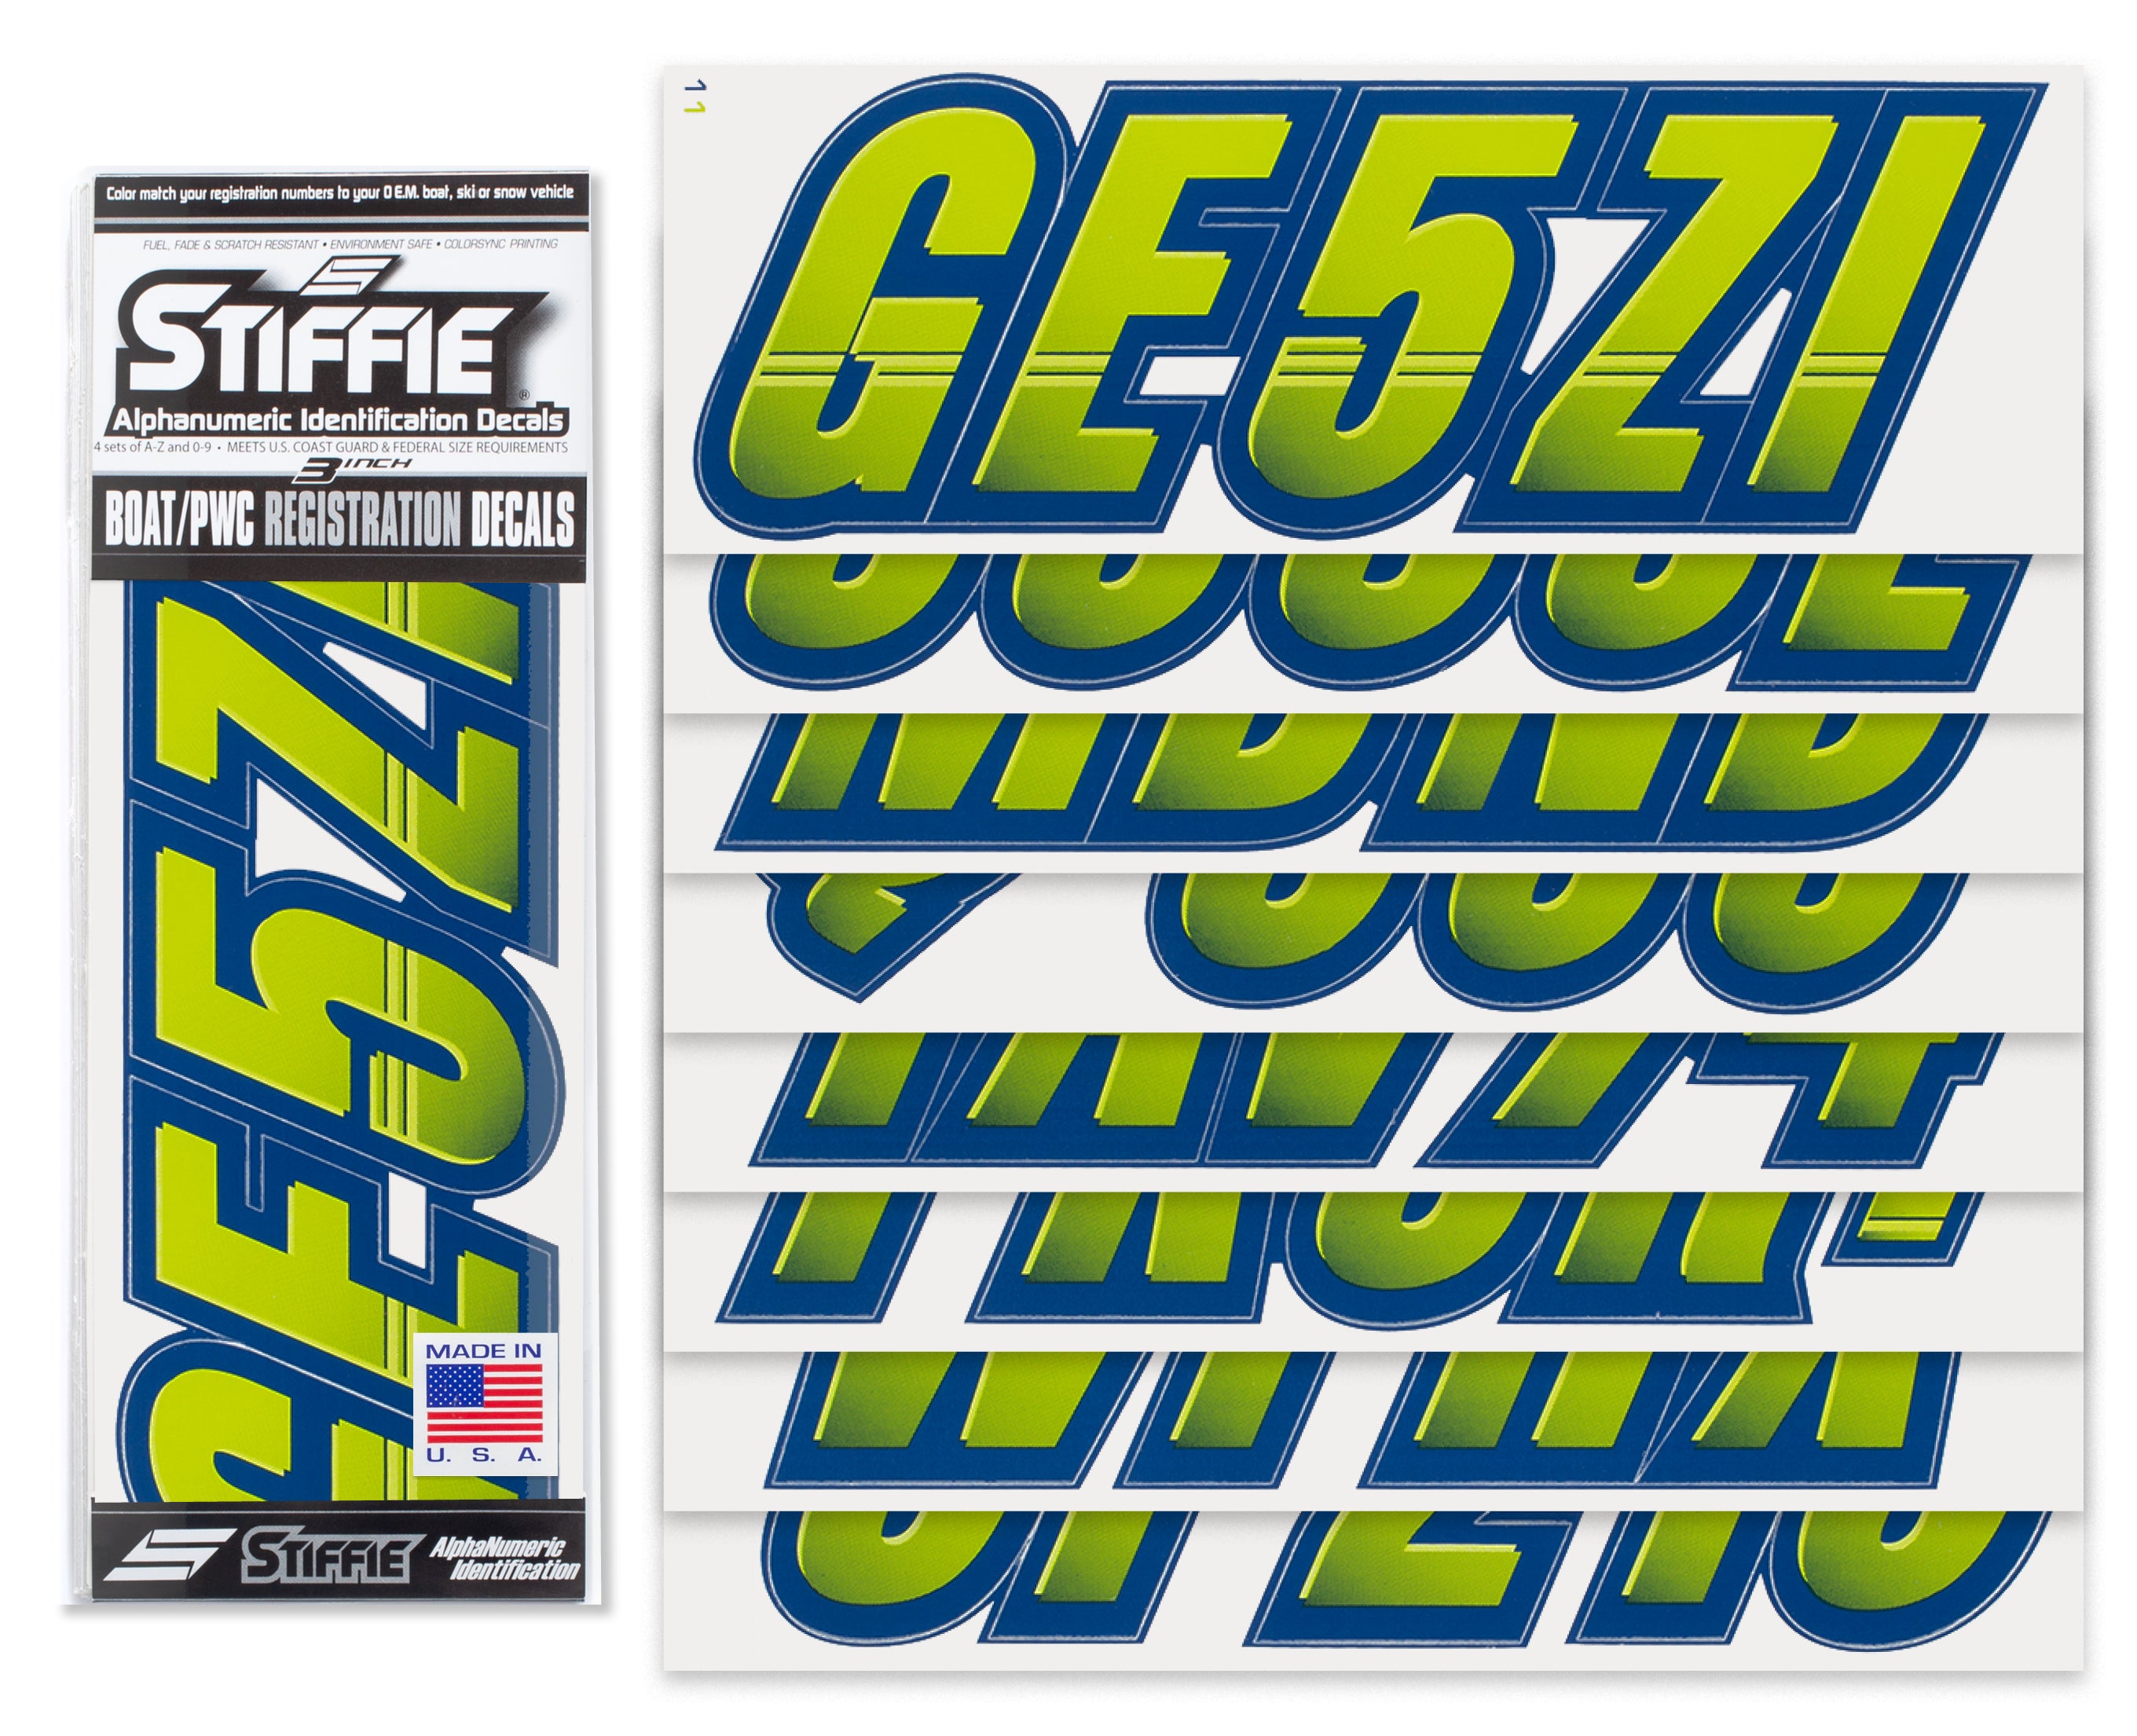 Stiffie Techtron Atomic Green/Navy 3" Alpha-Numeric Registration Identification Numbers Stickers Decals for Boats & Personal Watercraft